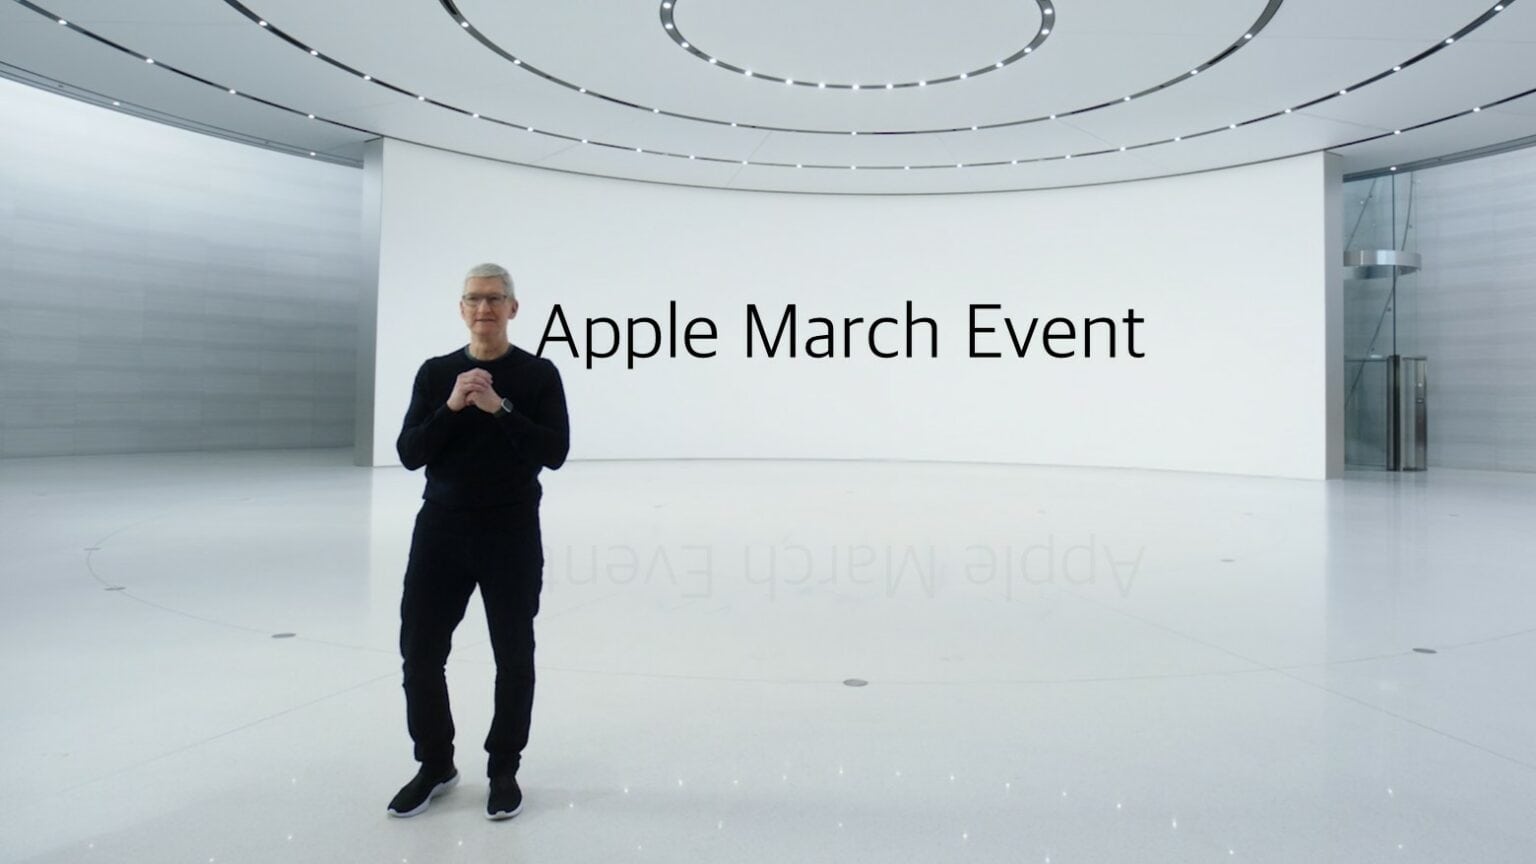 The Apple March event is almost here.